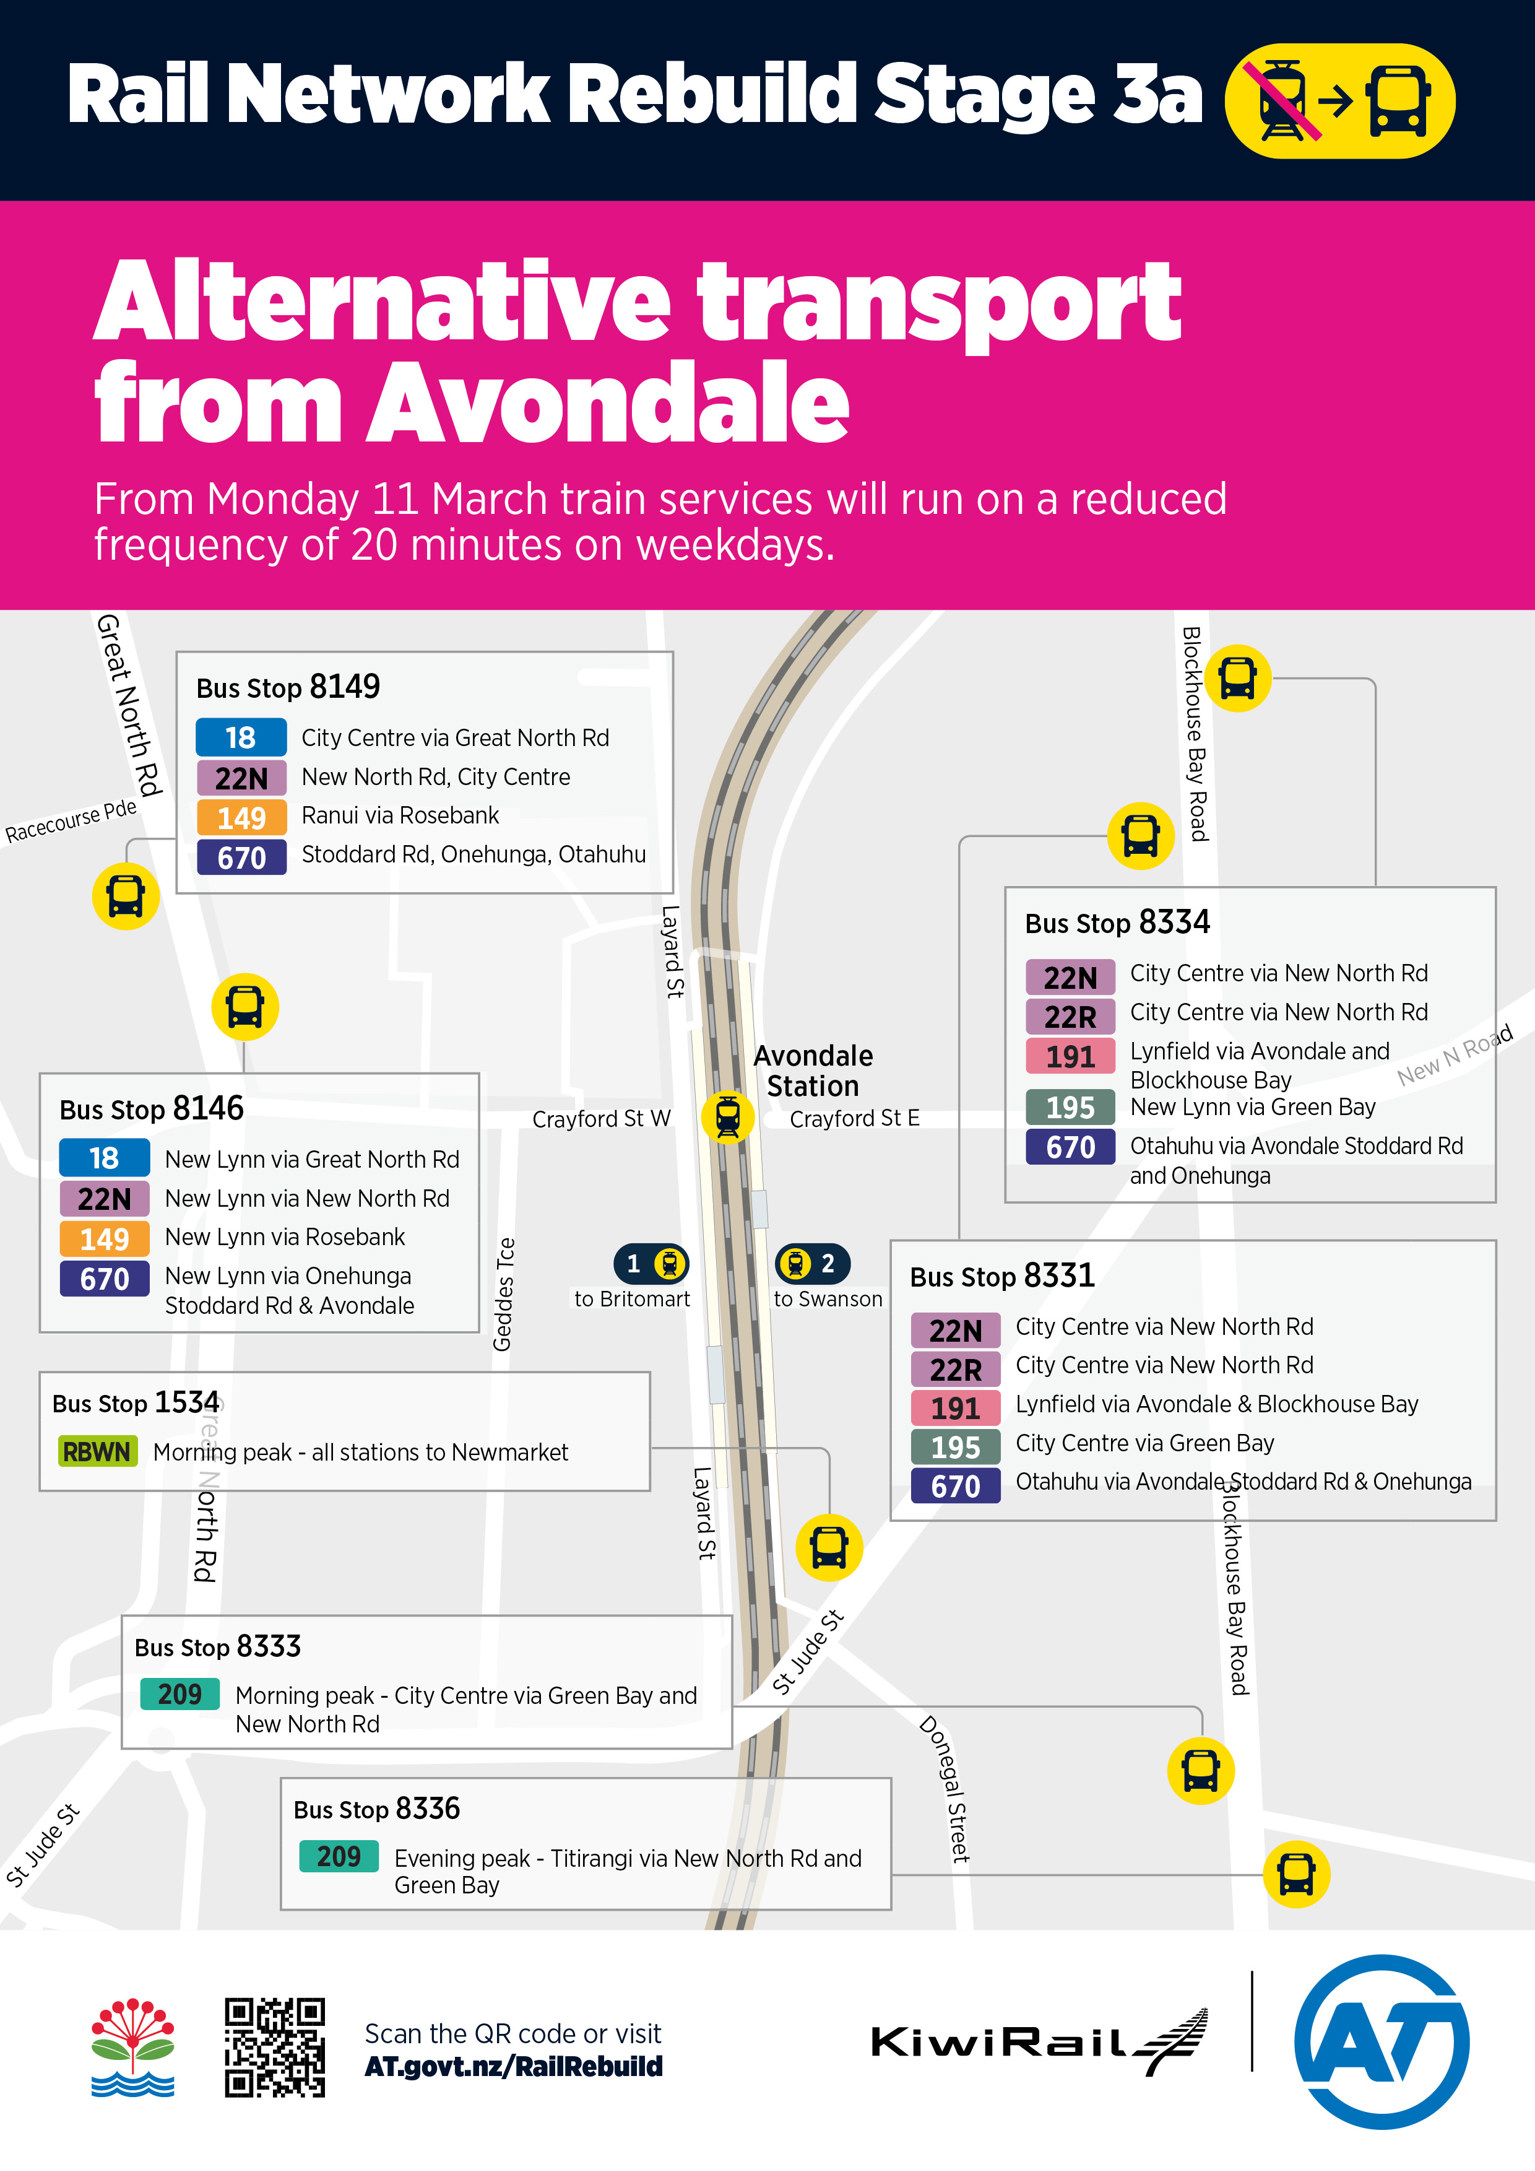 Poster showing alternative transport options from Avondale Station during Stage 3 of the Rail Network Rebuild